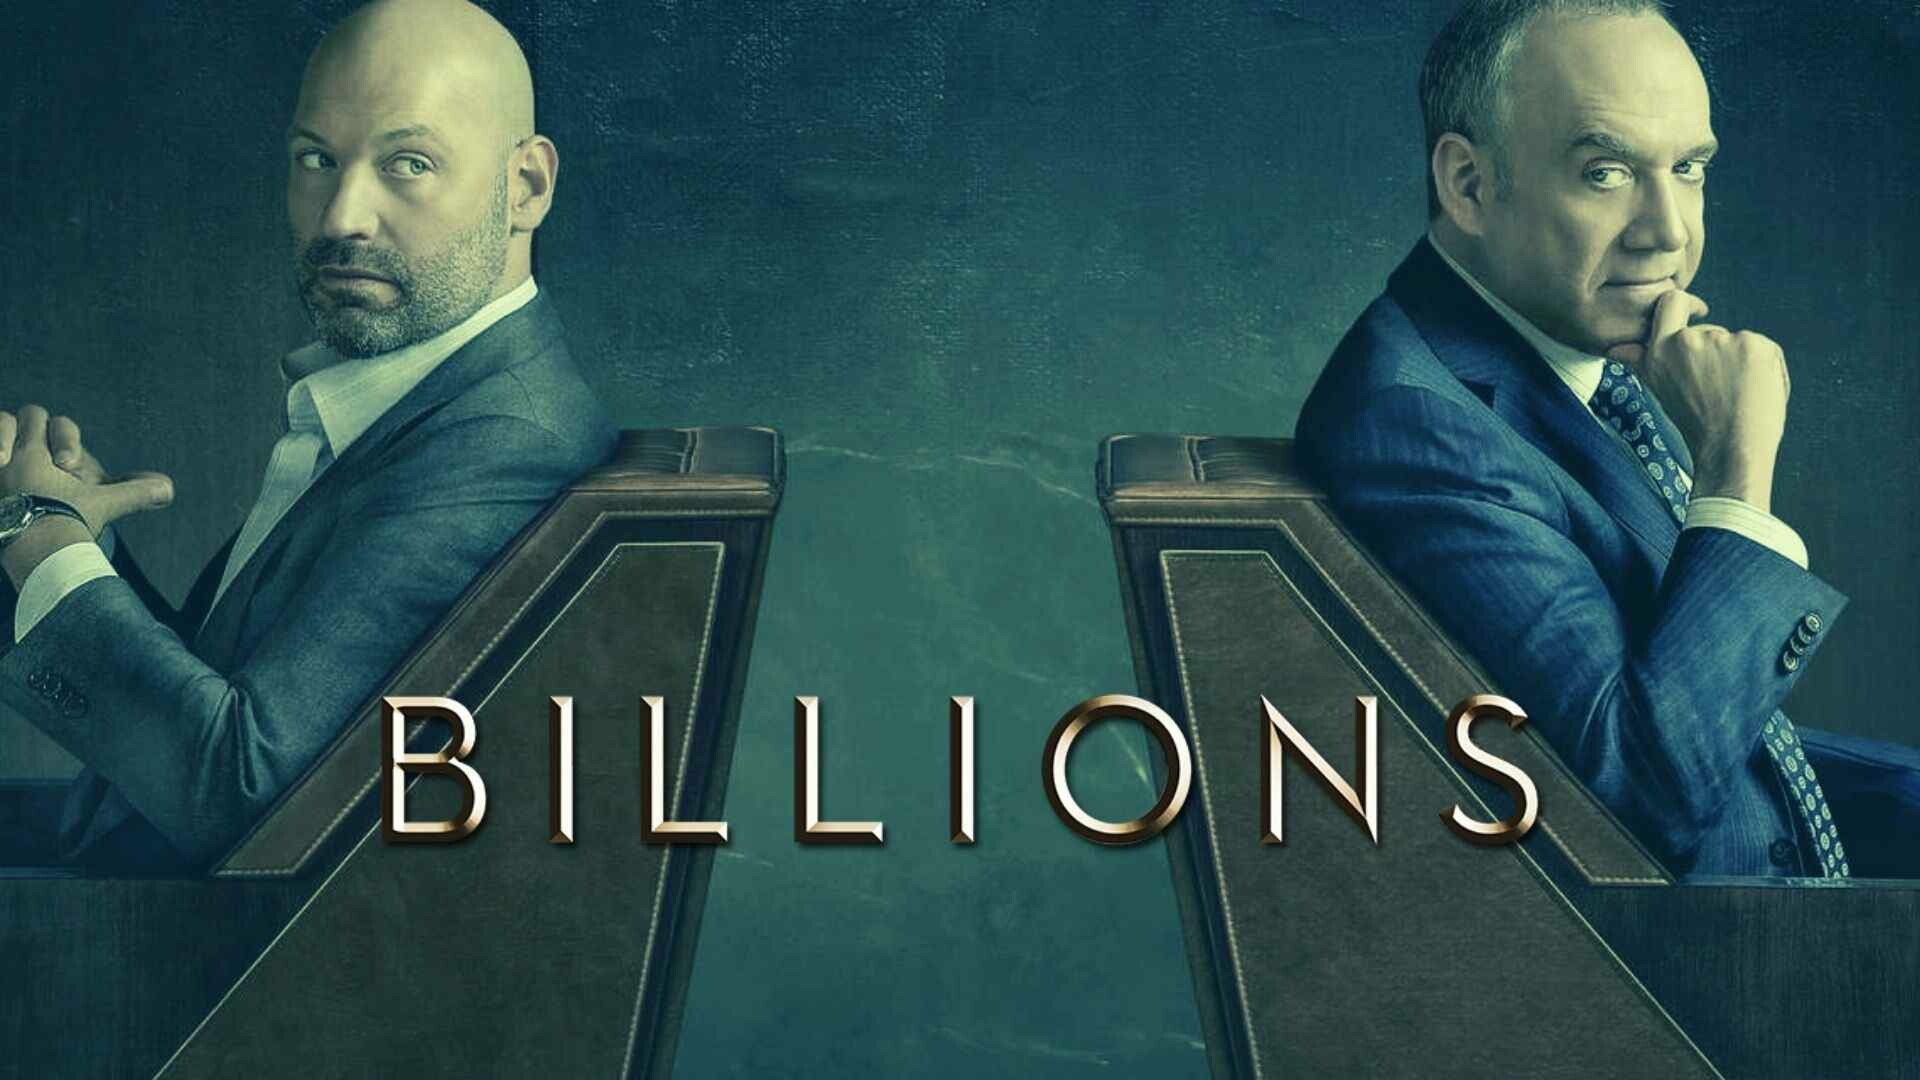 Billions: Scored the best series debut performance ever for a Showtime original series with its premiere debut drawing 2.99 million views. 1920x1080 Full HD Wallpaper.